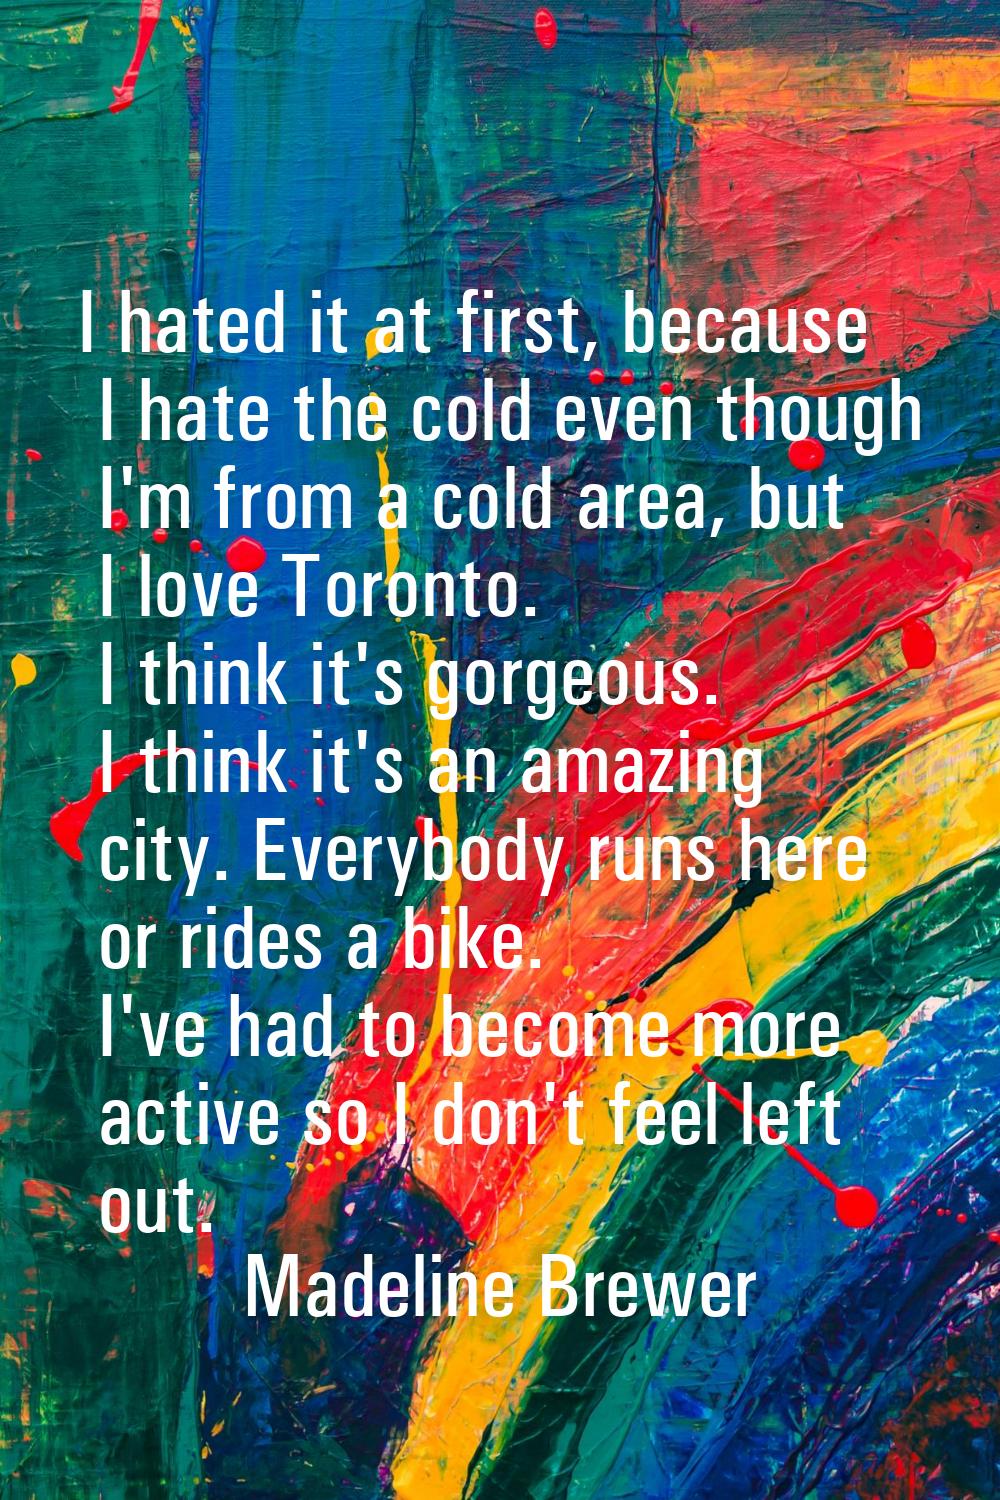 I hated it at first, because I hate the cold even though I'm from a cold area, but I love Toronto. 